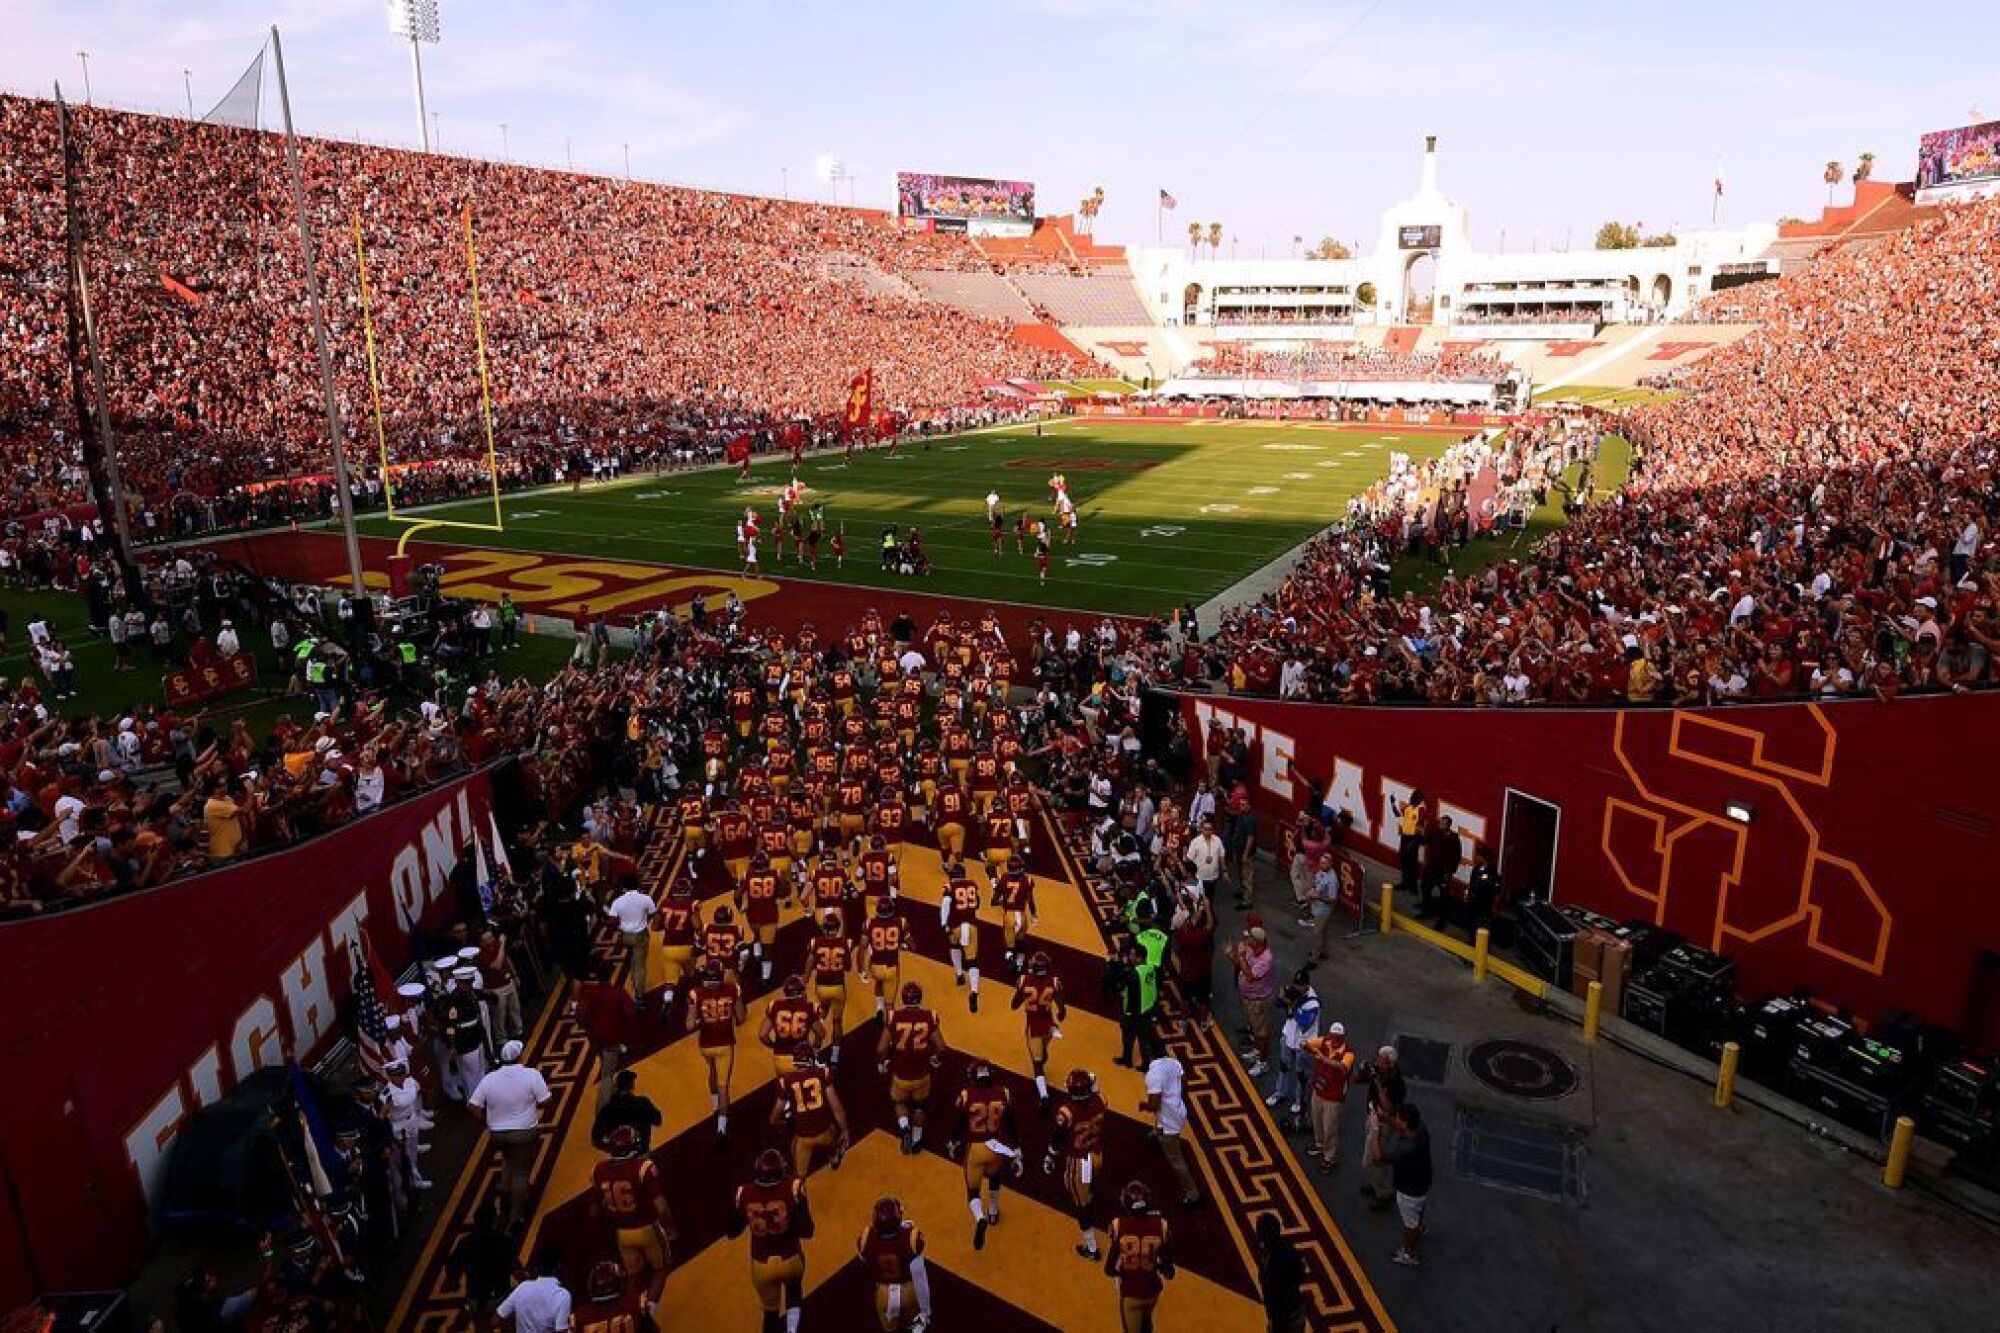 USC players take the field before a game against Fresno State.